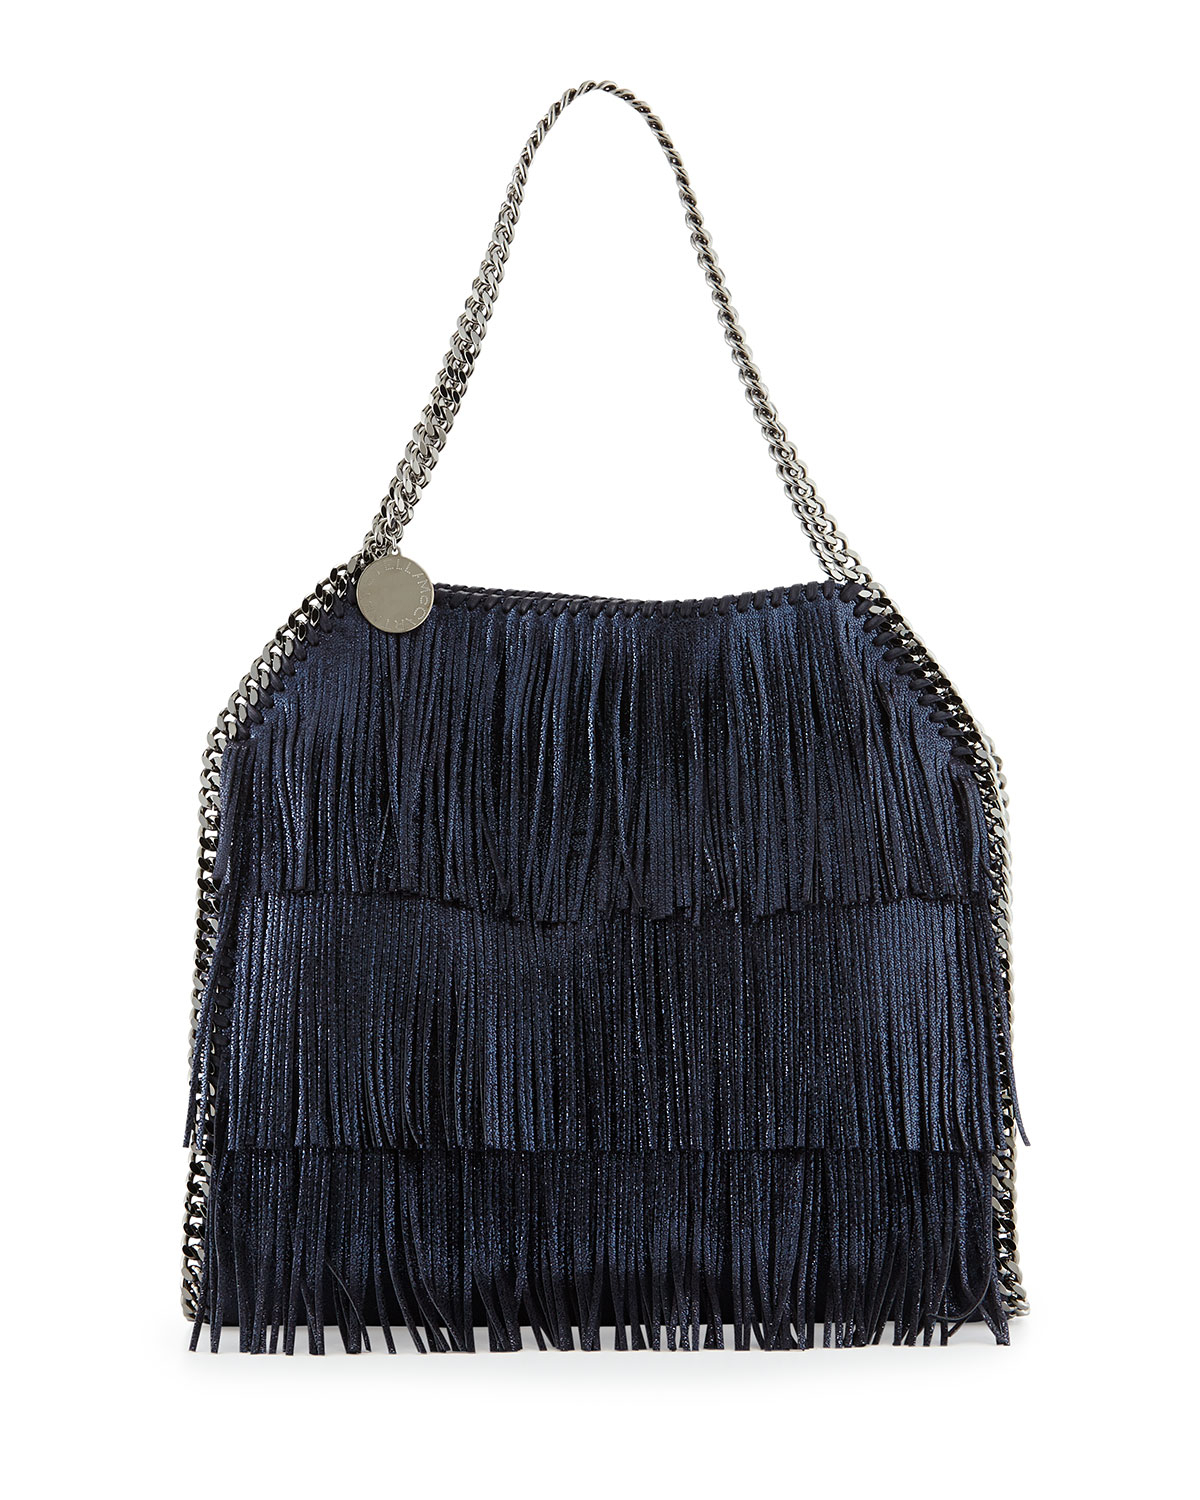 Stella Mccartney Falabella Small Fringe Tote Bag Navy in Blue (NAVY) | Lyst